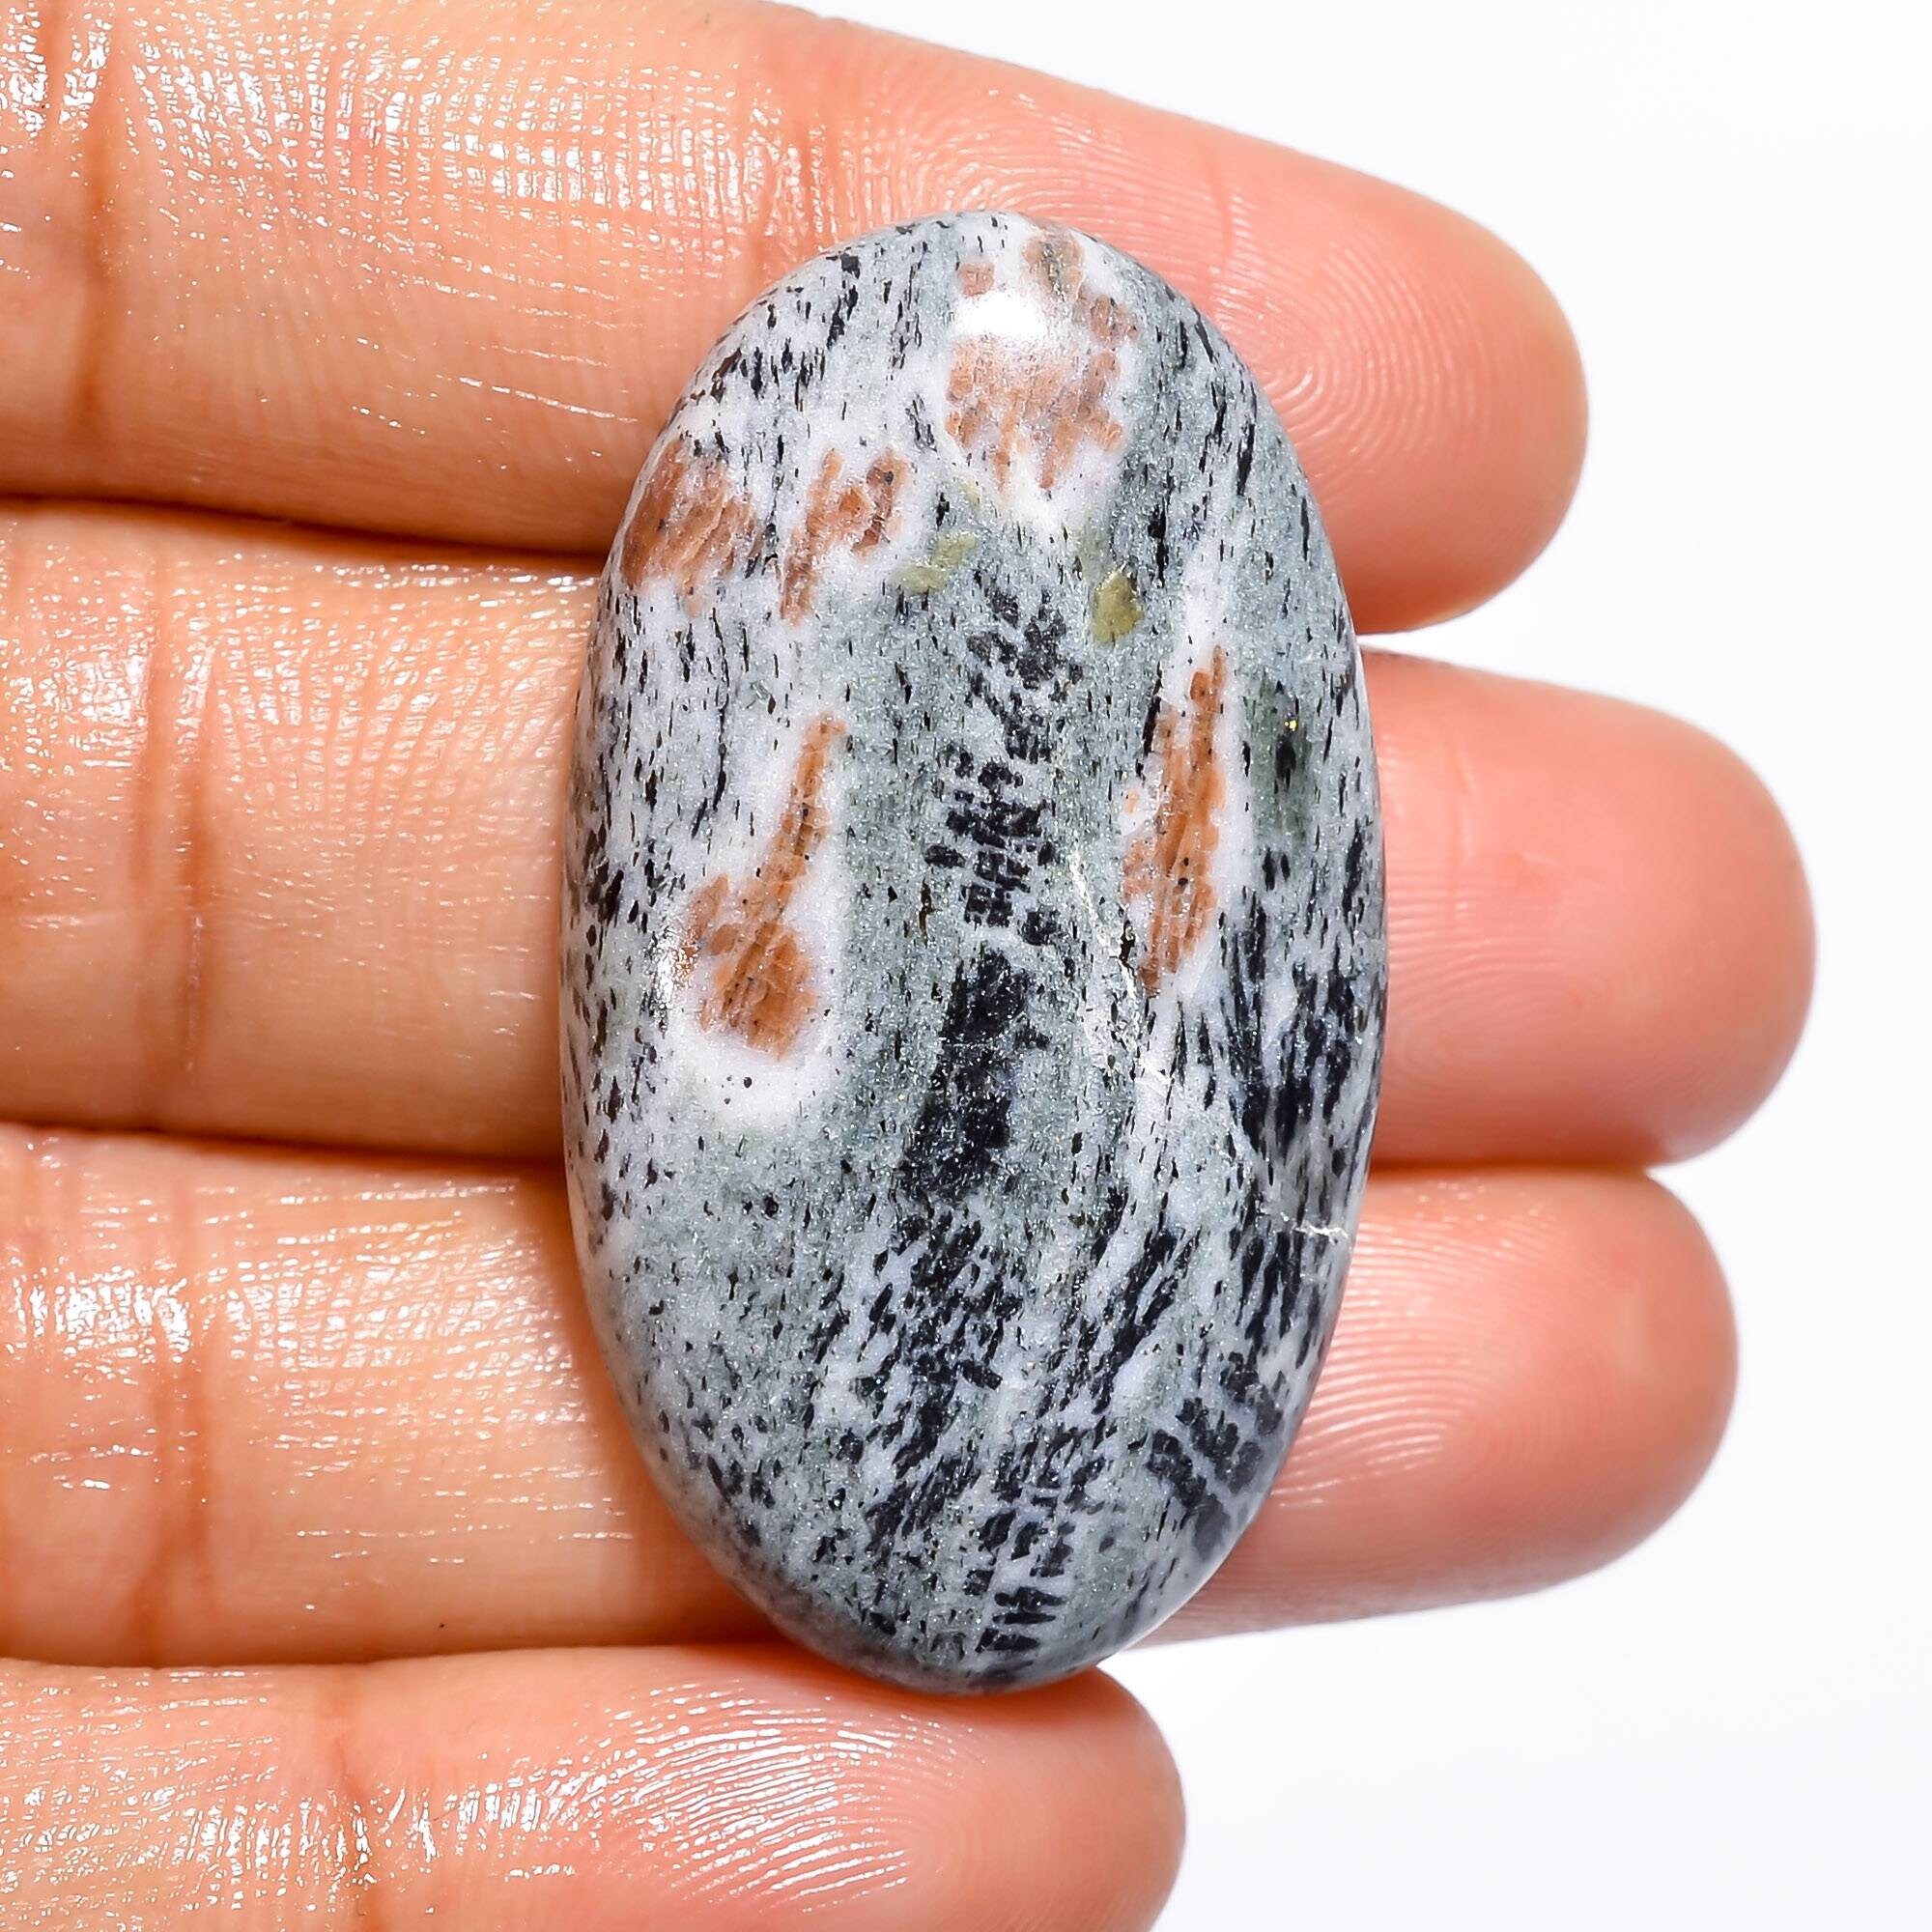 Amazing Top Grade Quality 100% Natural Hornblende Oval Shape Cabochon Loose Gemstone For Making Jewelry 46 Ct 38X22X7 mm H-526